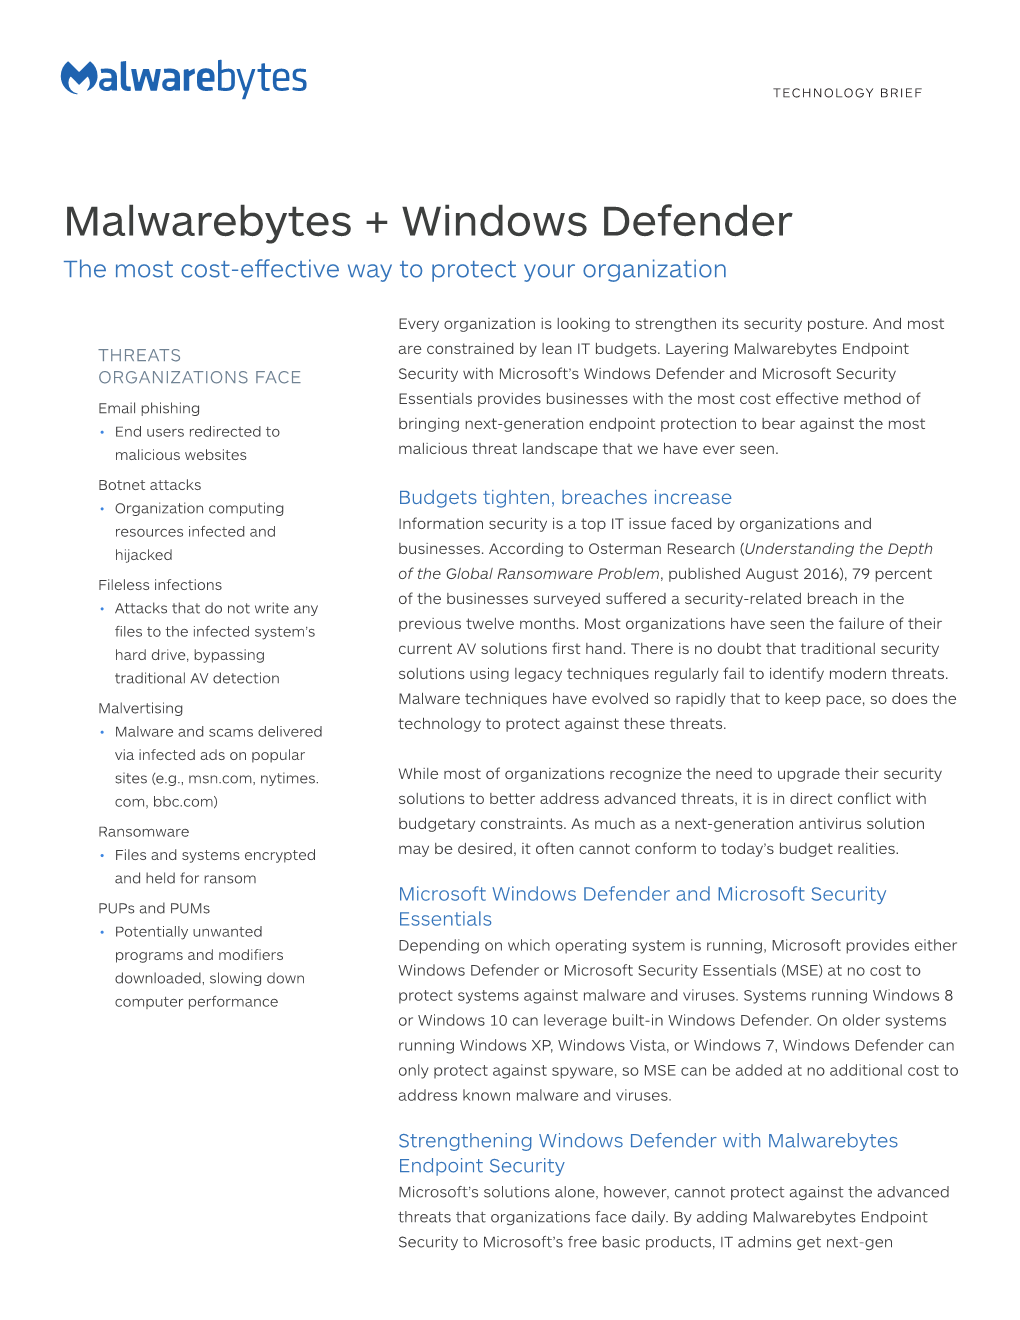 Malwarebytes + Windows Defender the Most Cost-Efective Way to Protect Your Organization